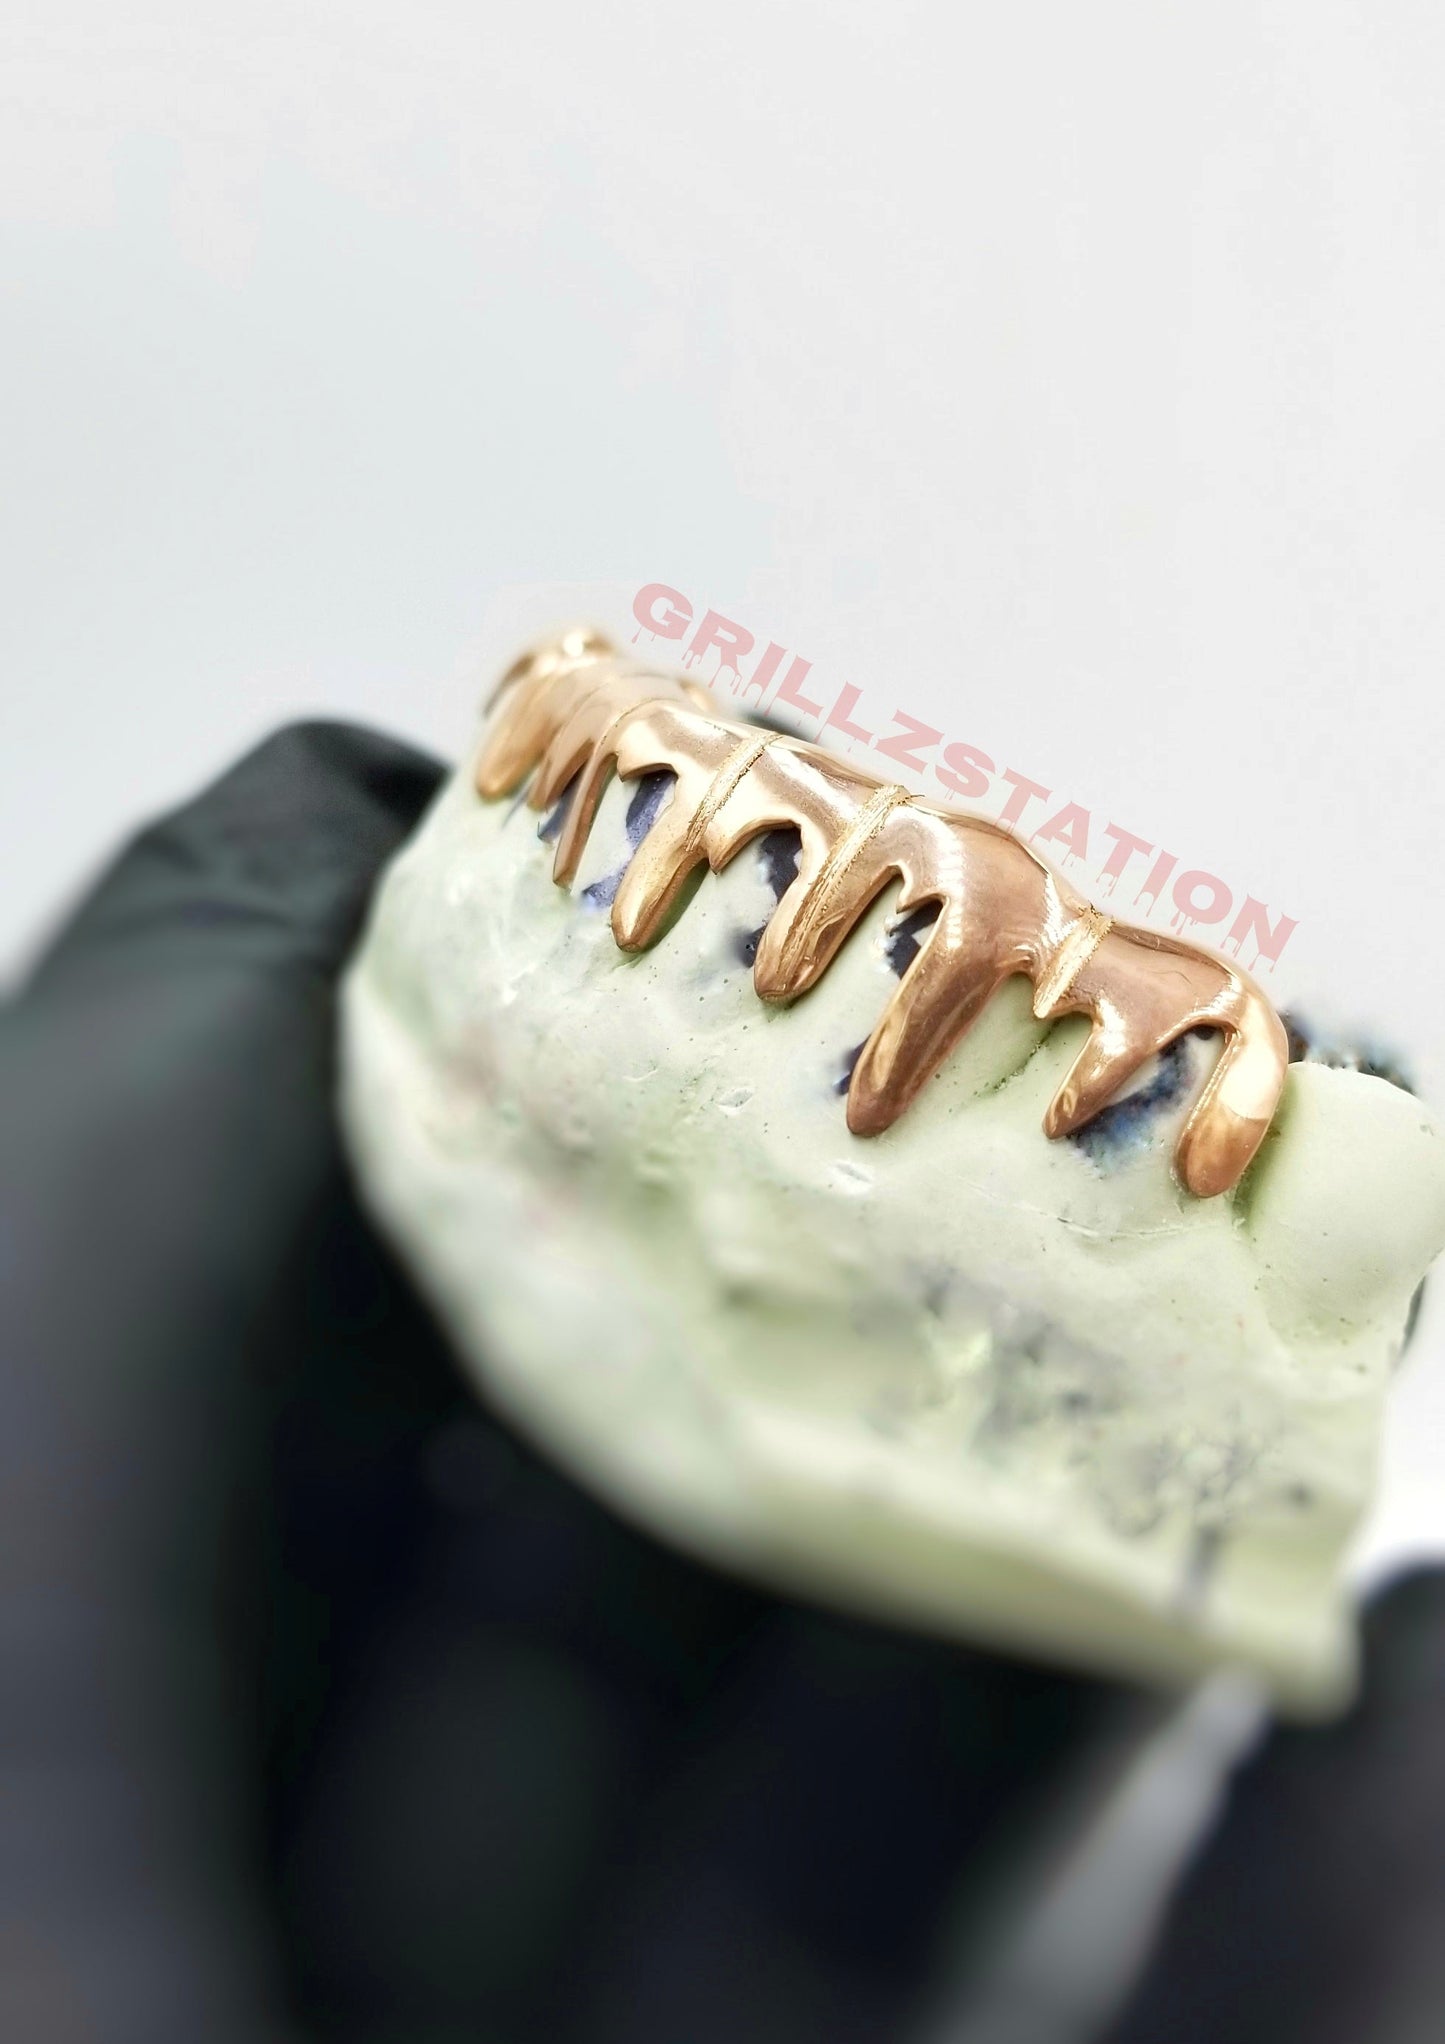 Dripping Custom Grillz By GRILLZSTATION - GRILLZSTATION 